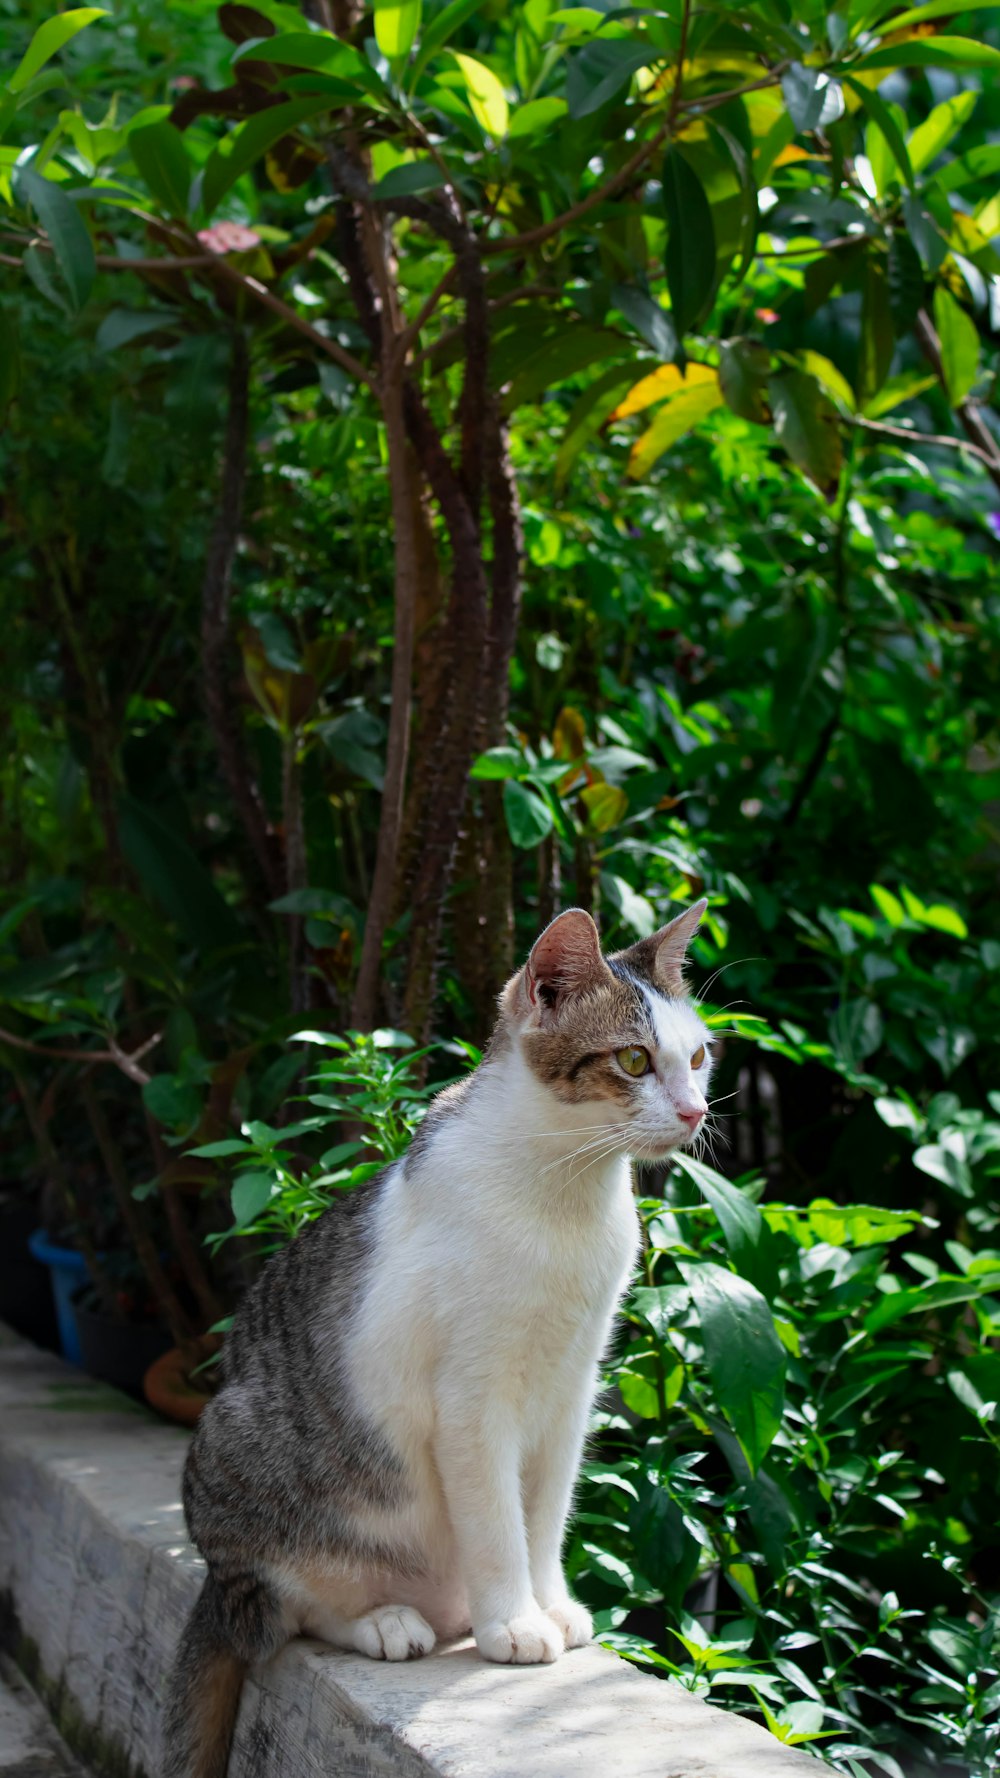 a cat sitting on a ledge in a garden